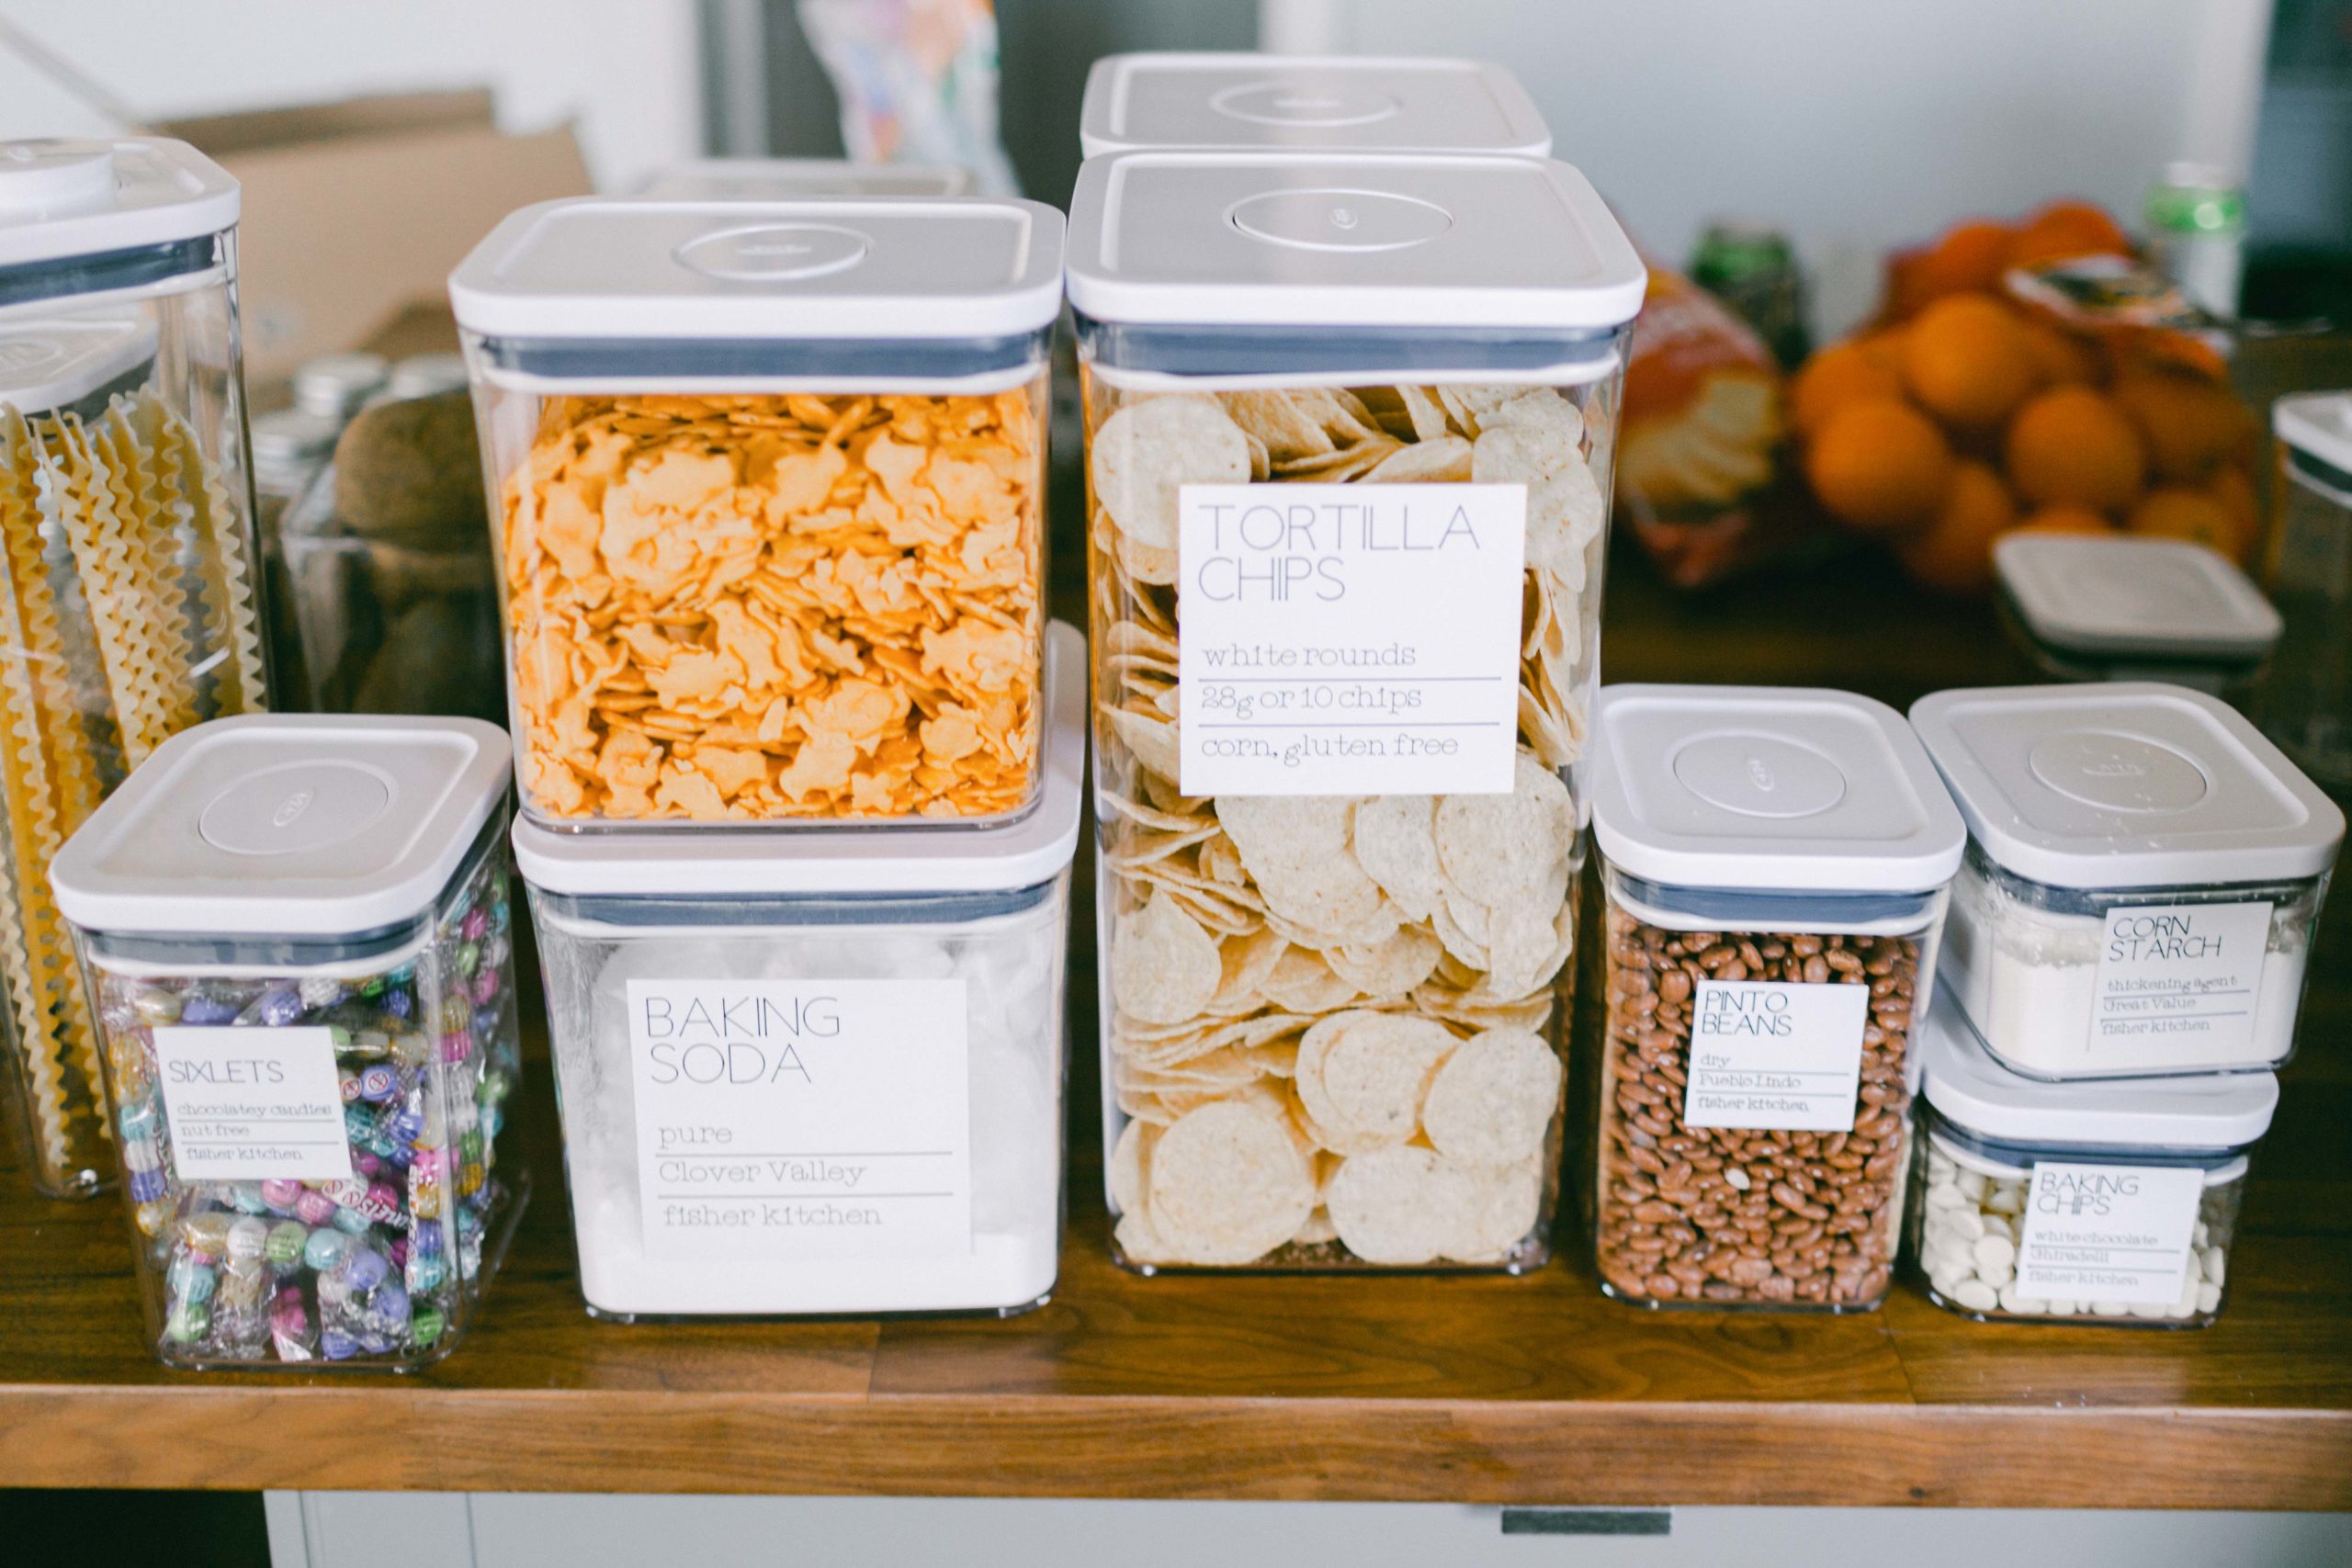 OXO Pop Containers Review: Pantry Organization Containers